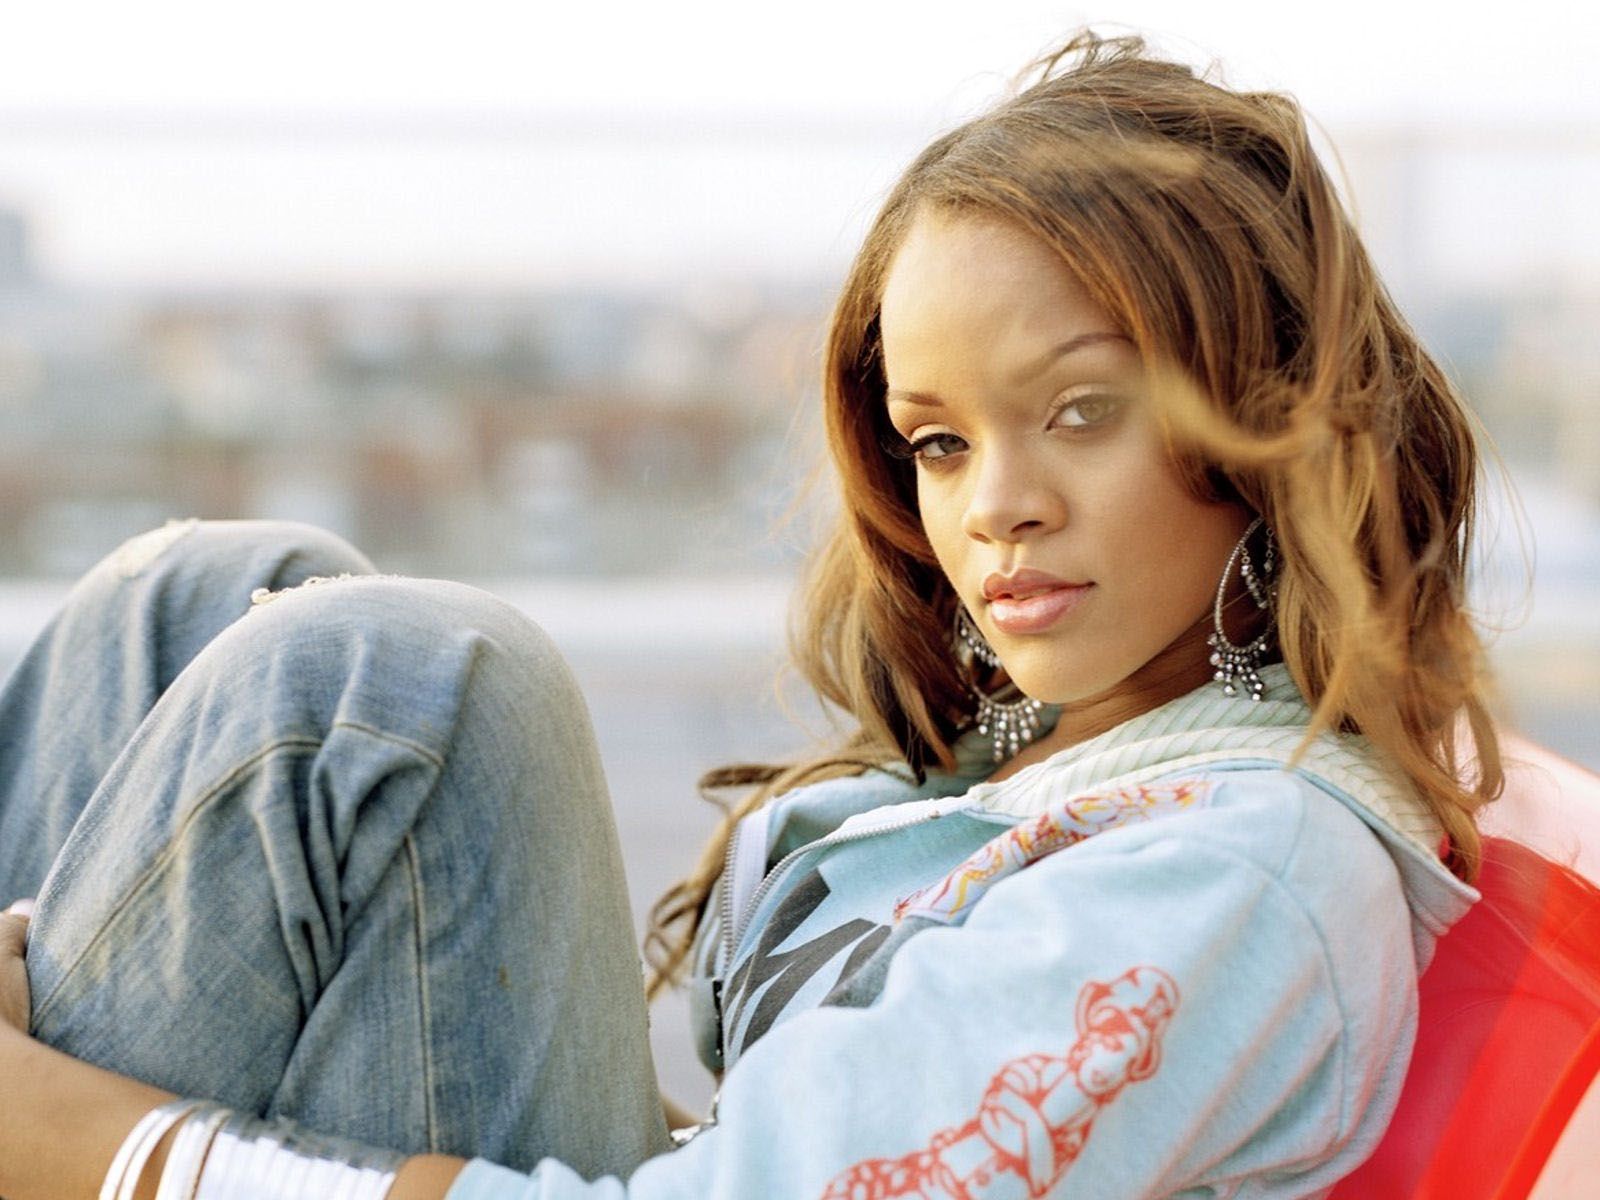 Rihanna in jeans wallpapers and images - wallpapers, pictures, photos